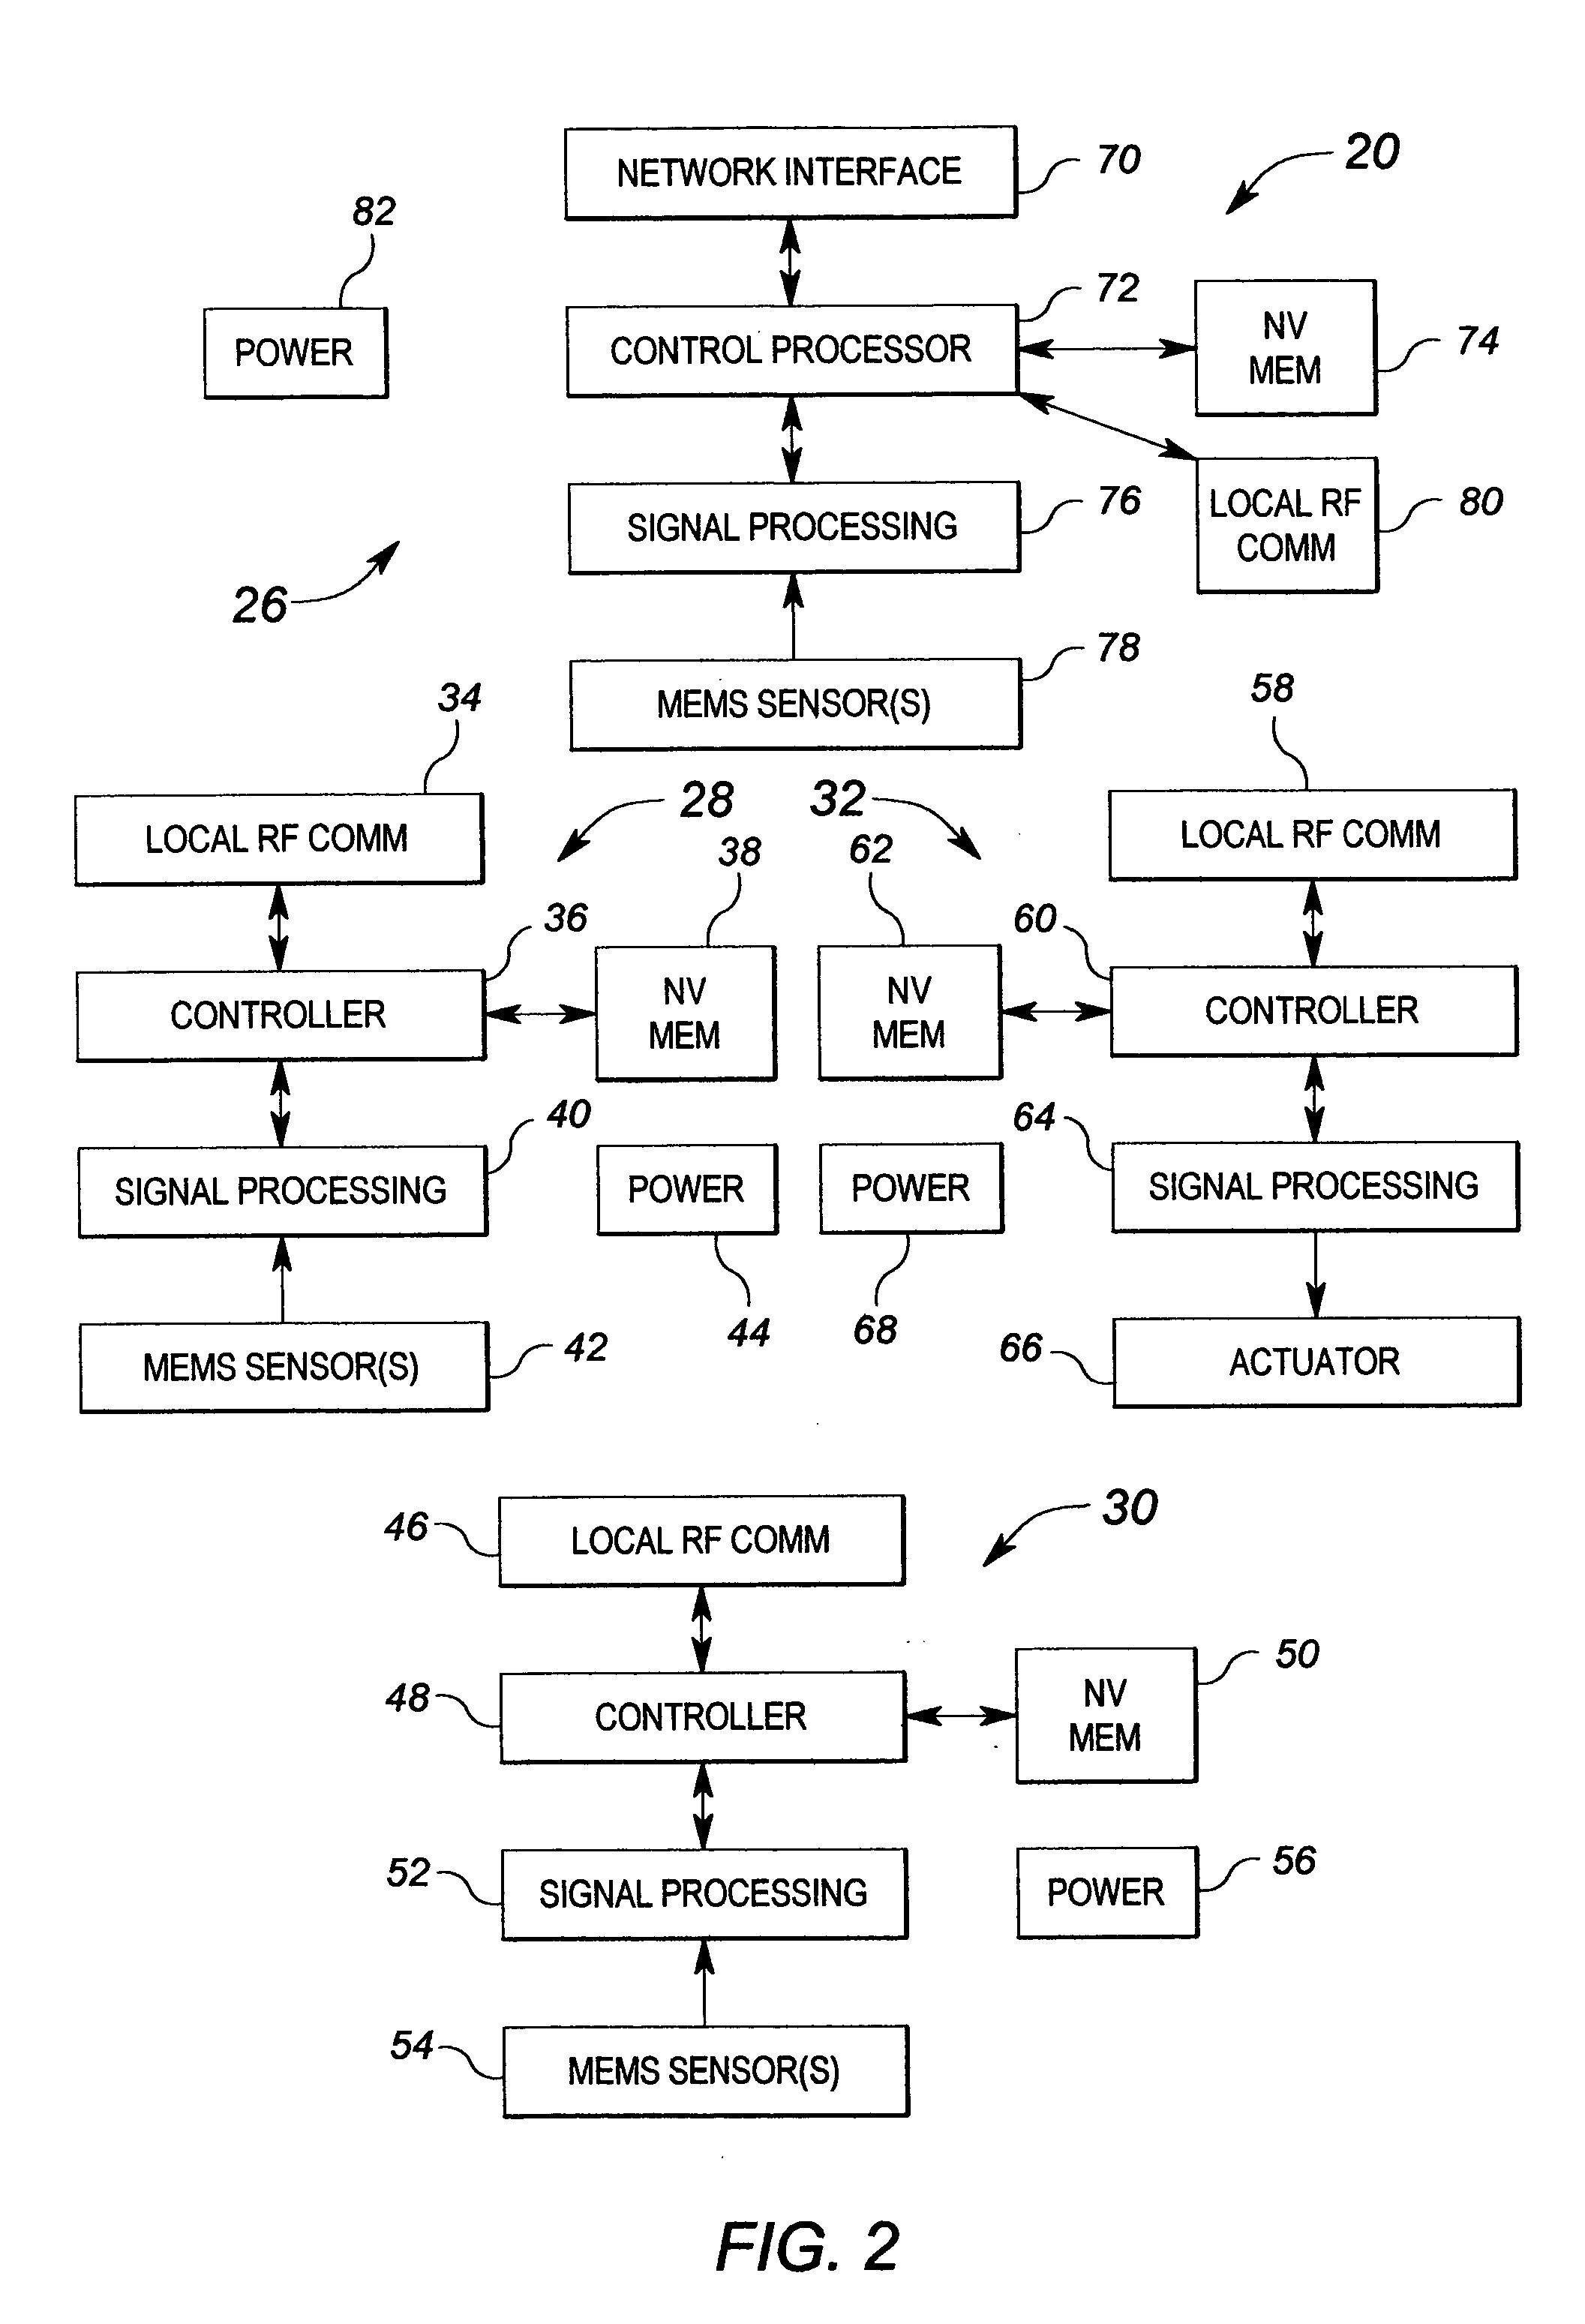 Method and apparatus for generating a building system model